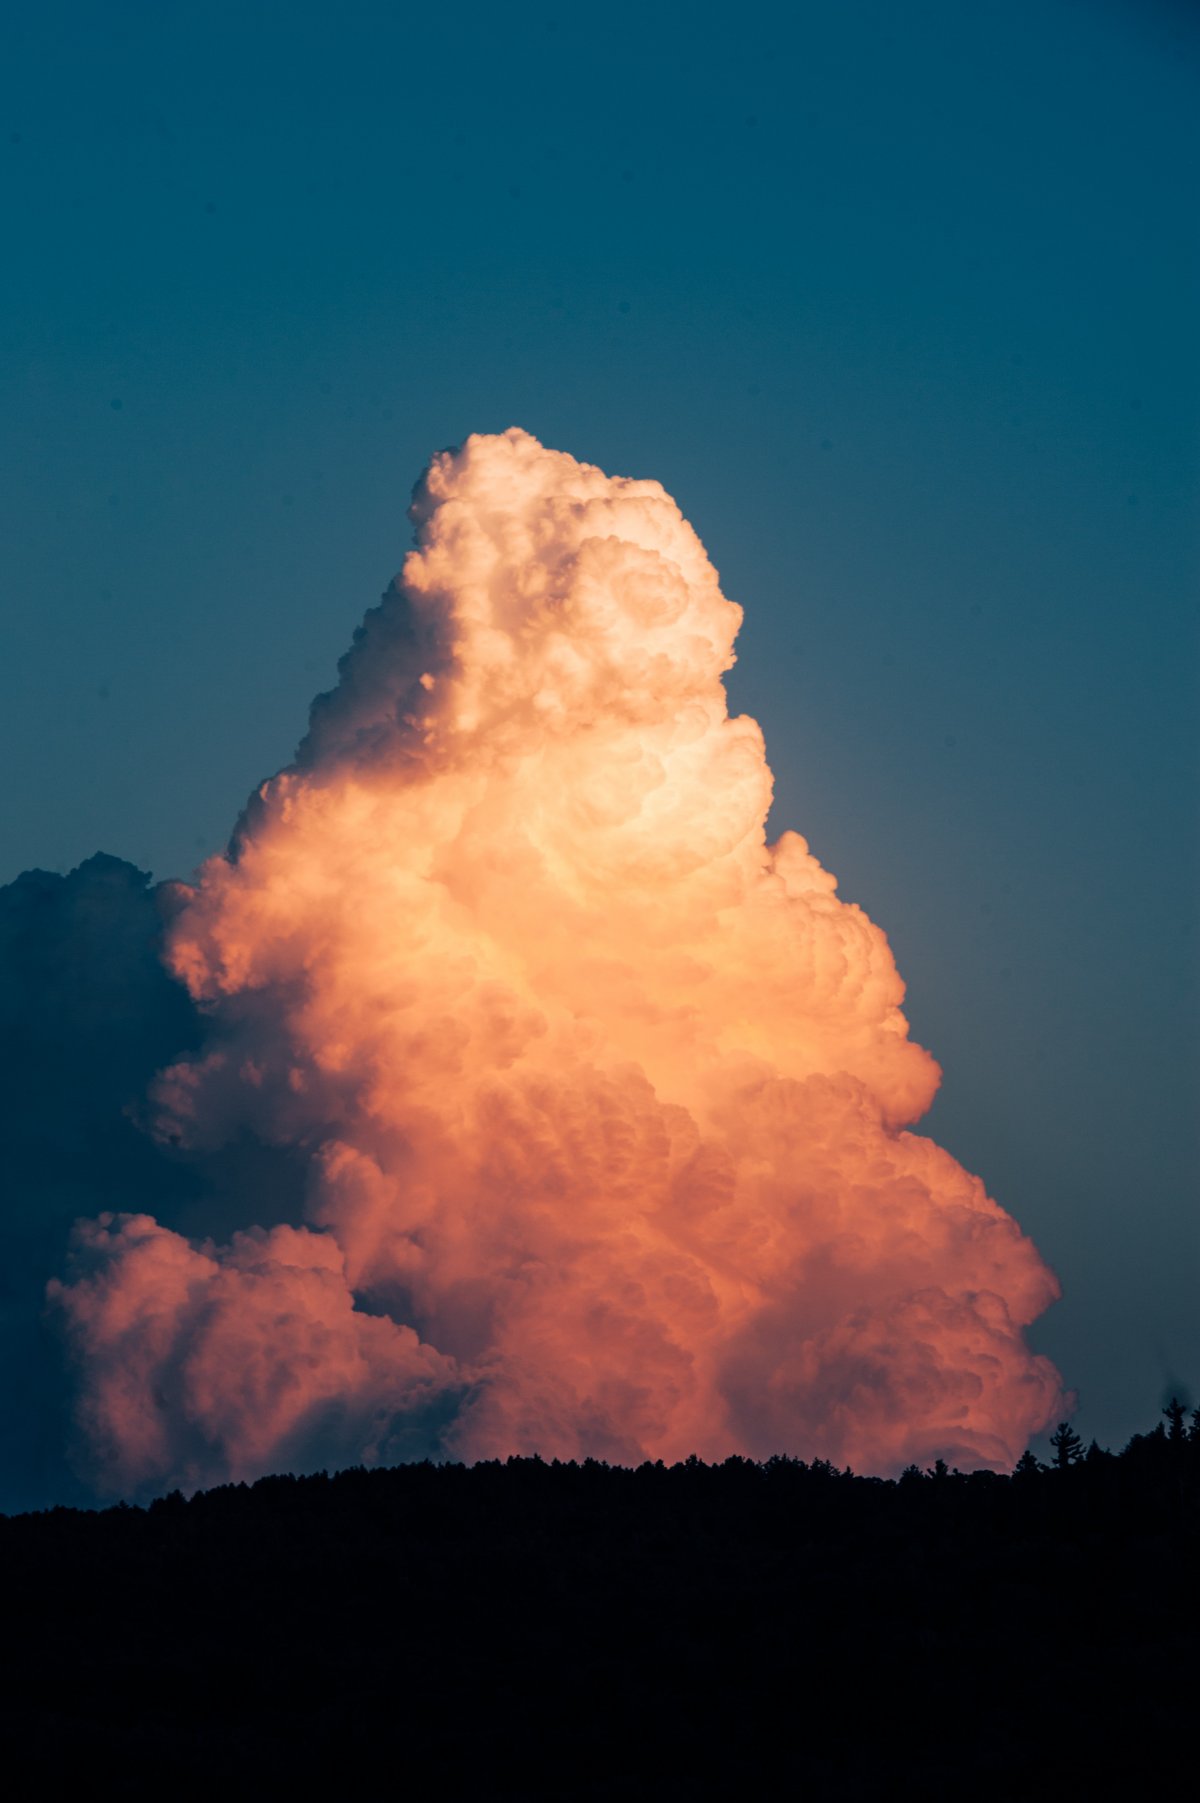 A picture of a burning cloud